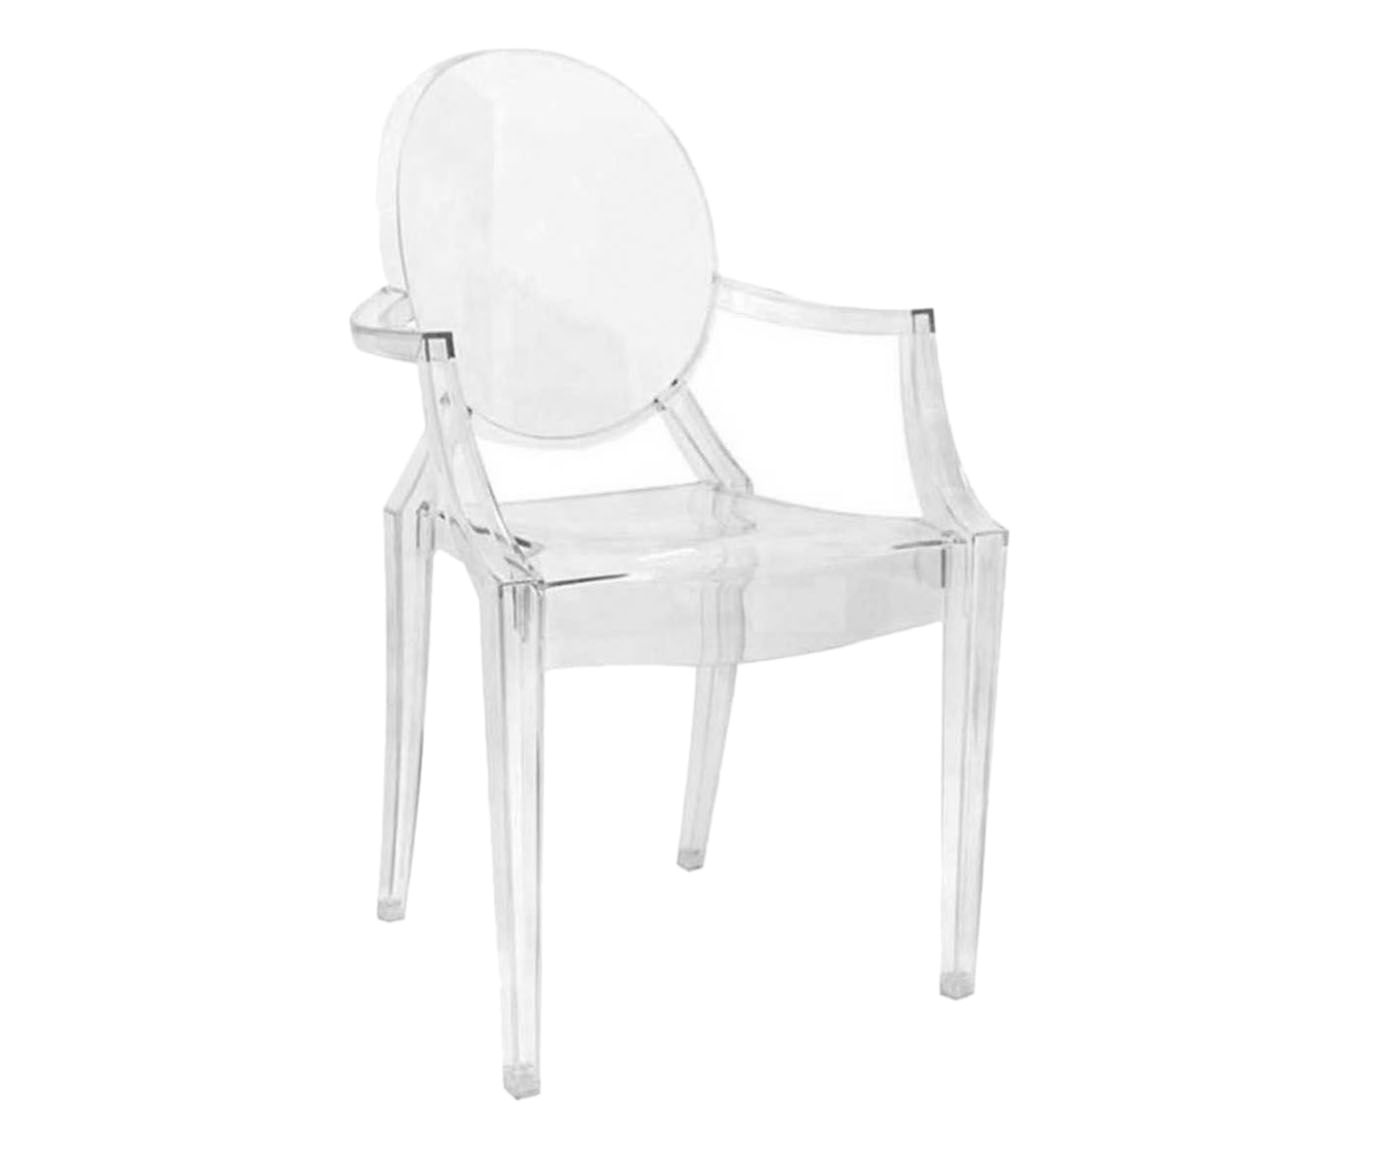 Poltrona charmeaut clear | Westwing.com.br